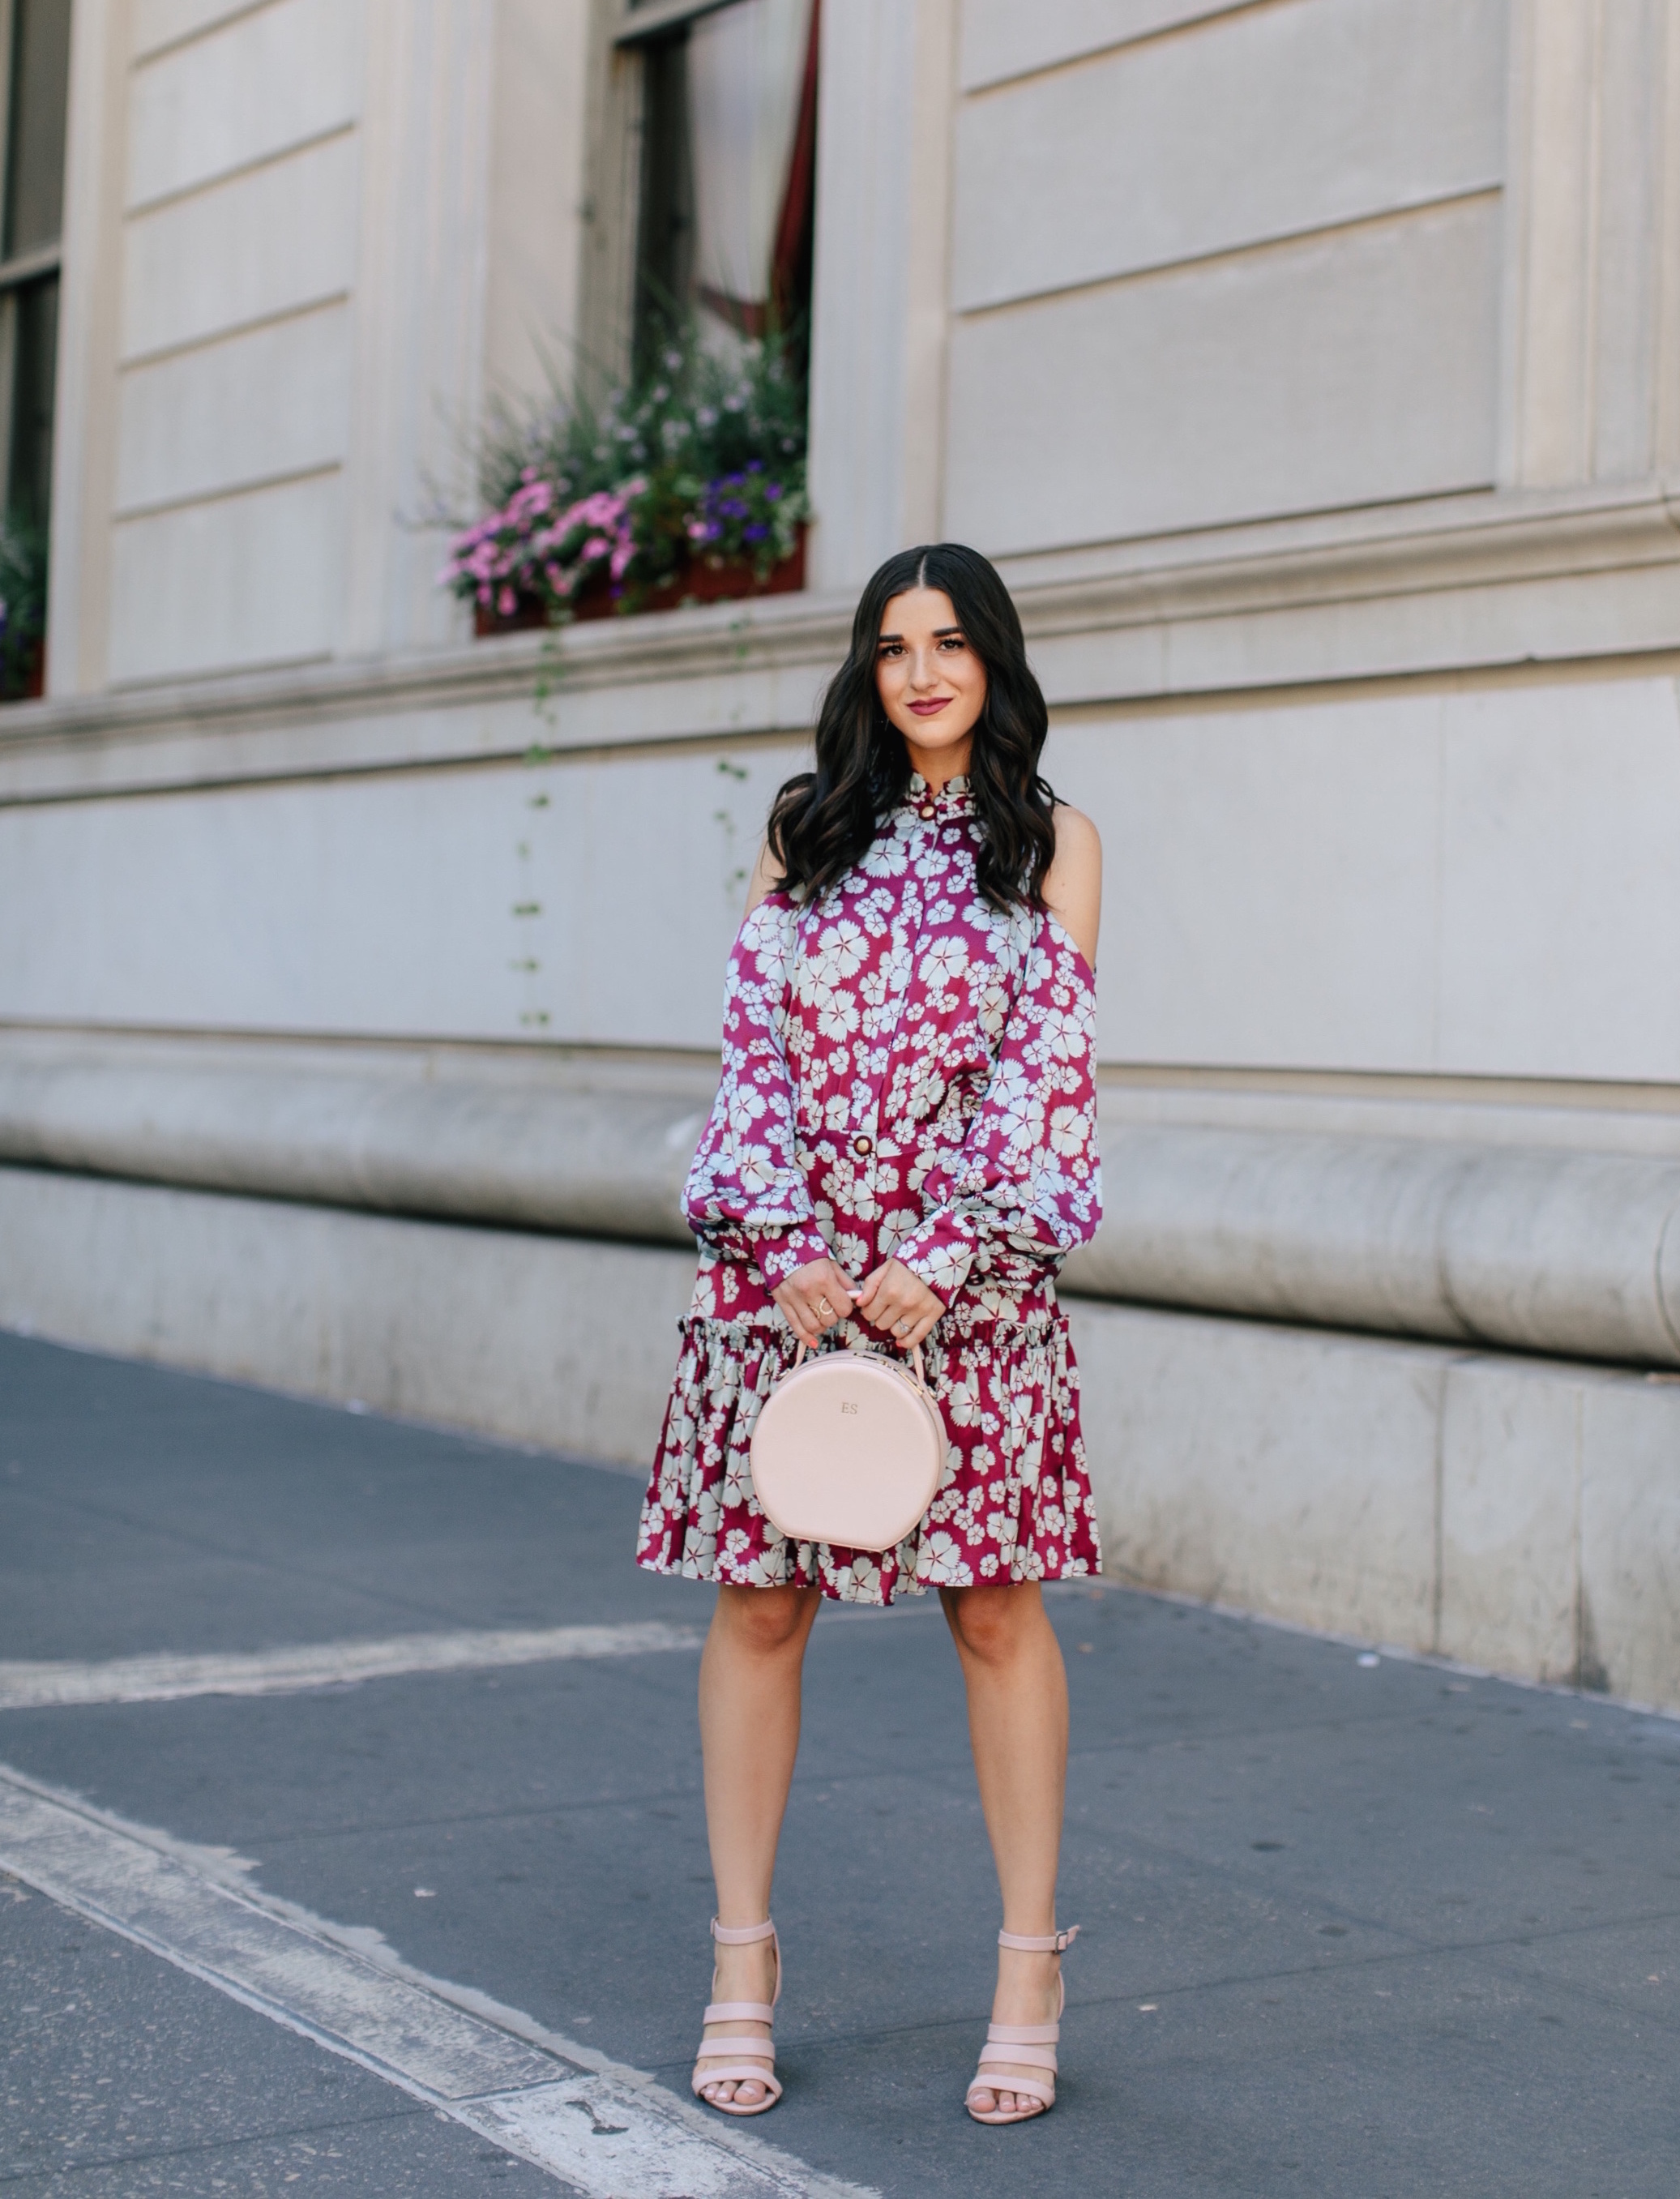 A Blogger’s Guide To Turning Your S.O. Into Your Photographer Cold Shoulder Floral Dress Esther Santer Fashion Blog NYC Street Style Blogger Outfit OOTD Trendy Designer Nordstrom Strappy Blush Pink Heels Circle Bag Shopping  Wavy Hair Diamond Jewelry.jpg